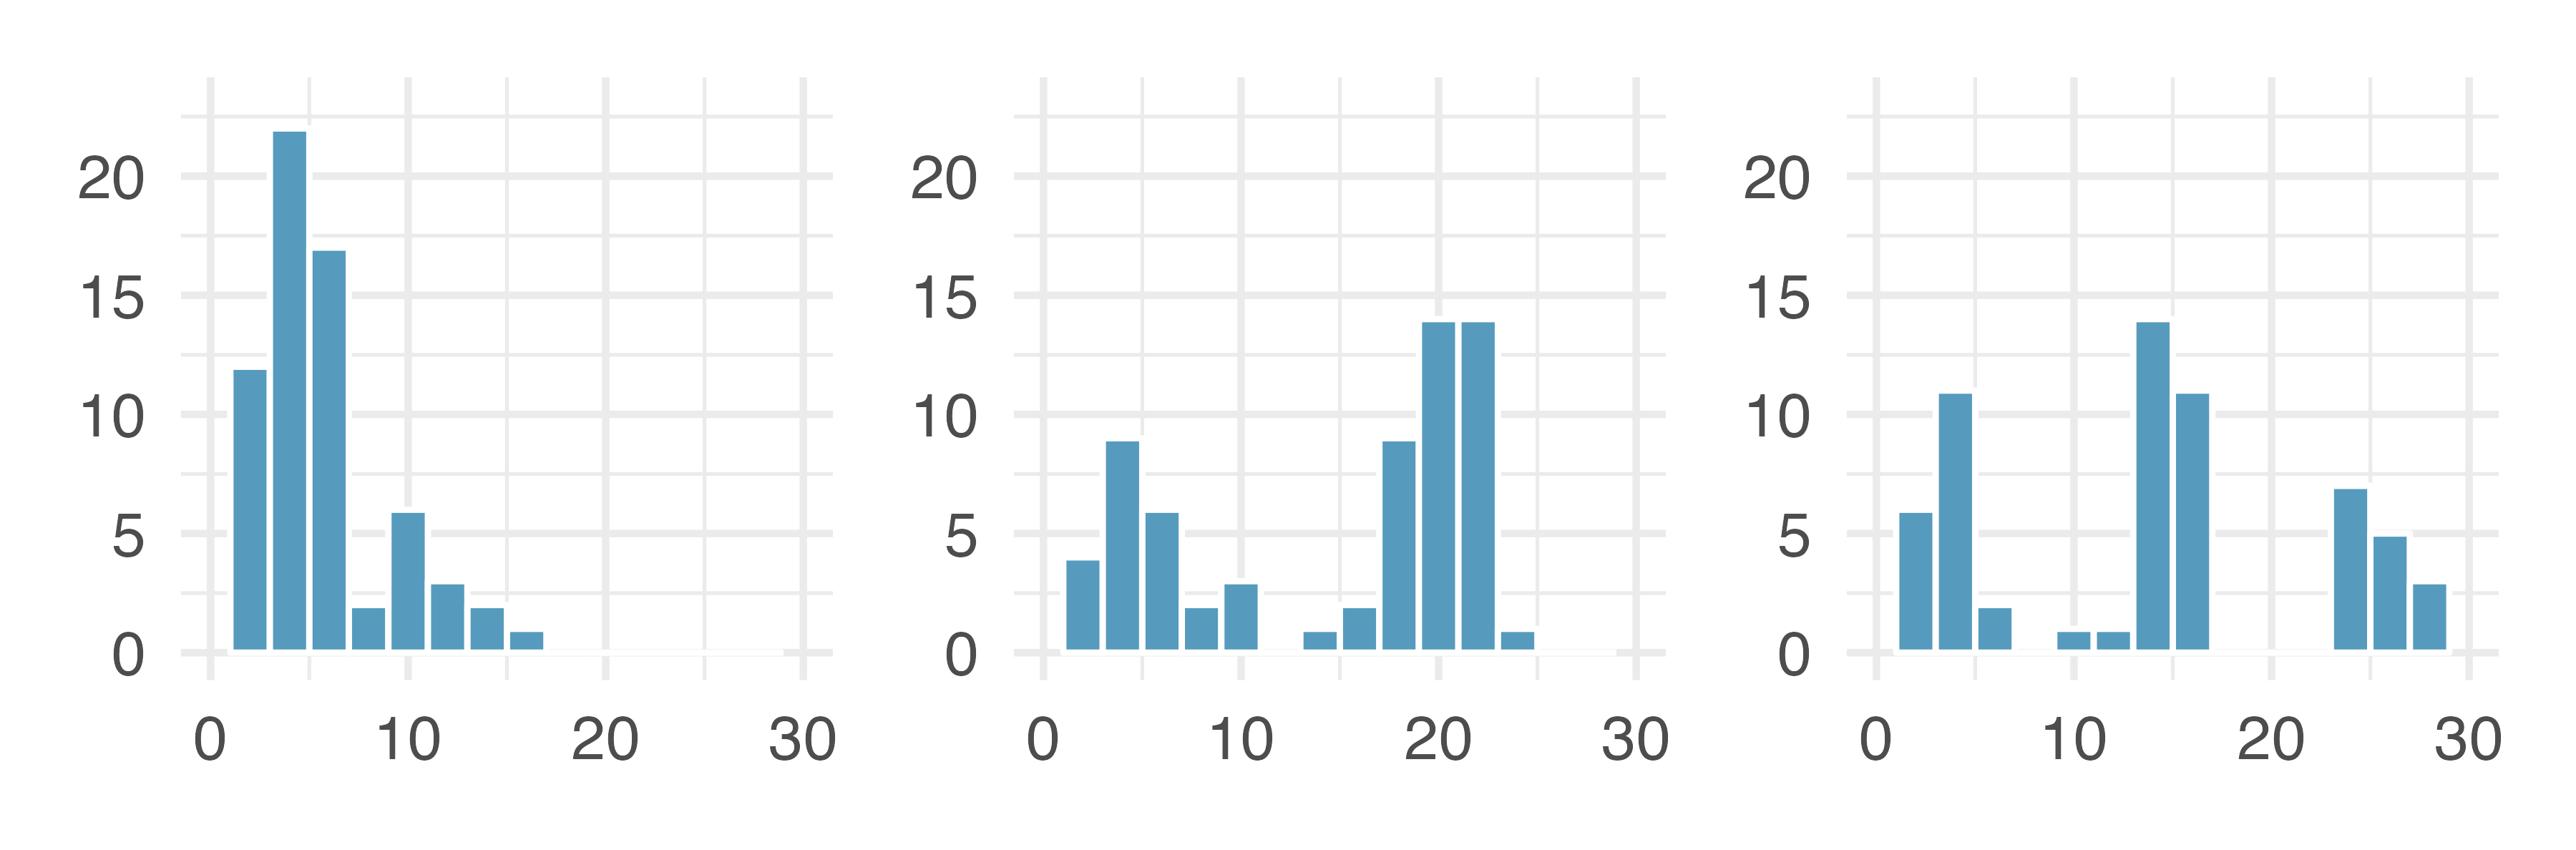 Three separate histograms on fabricated data.  The first histogram shows a unimodal distribution, the second histogram shows a bimodal distribution, and the third histogram shows a multimodal distribution.